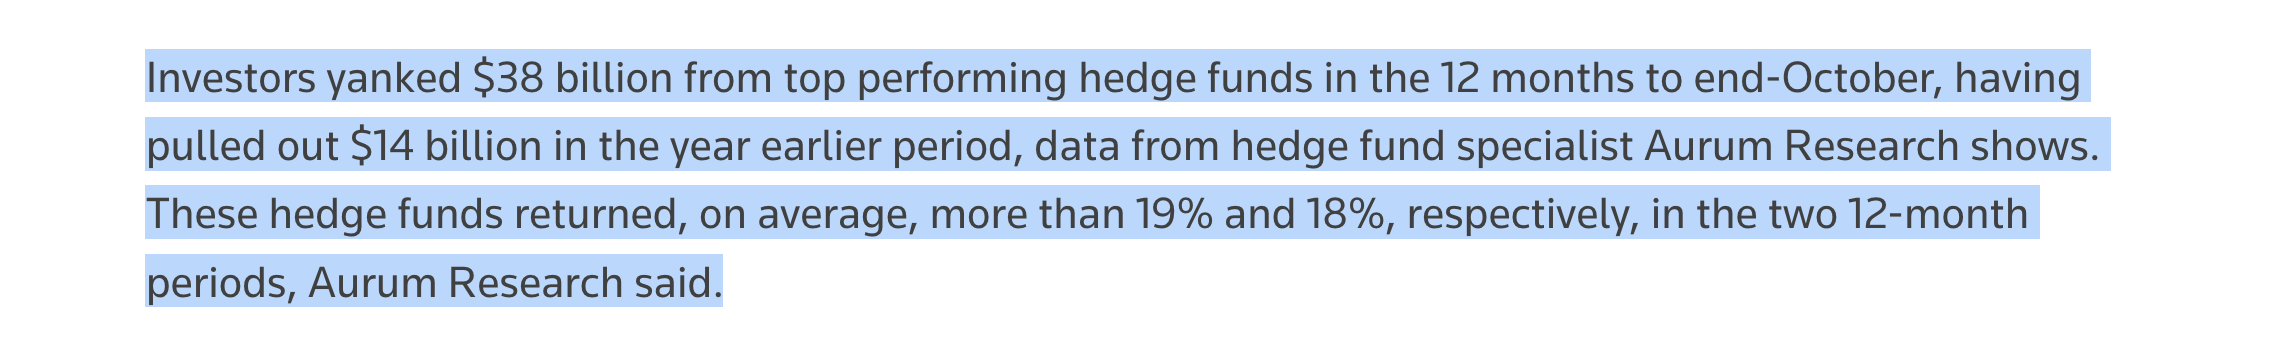 NEWS ARTICLE OUTLINING A 38 BILLION DOLLAR LOSS FOR HEDGEFUNDS